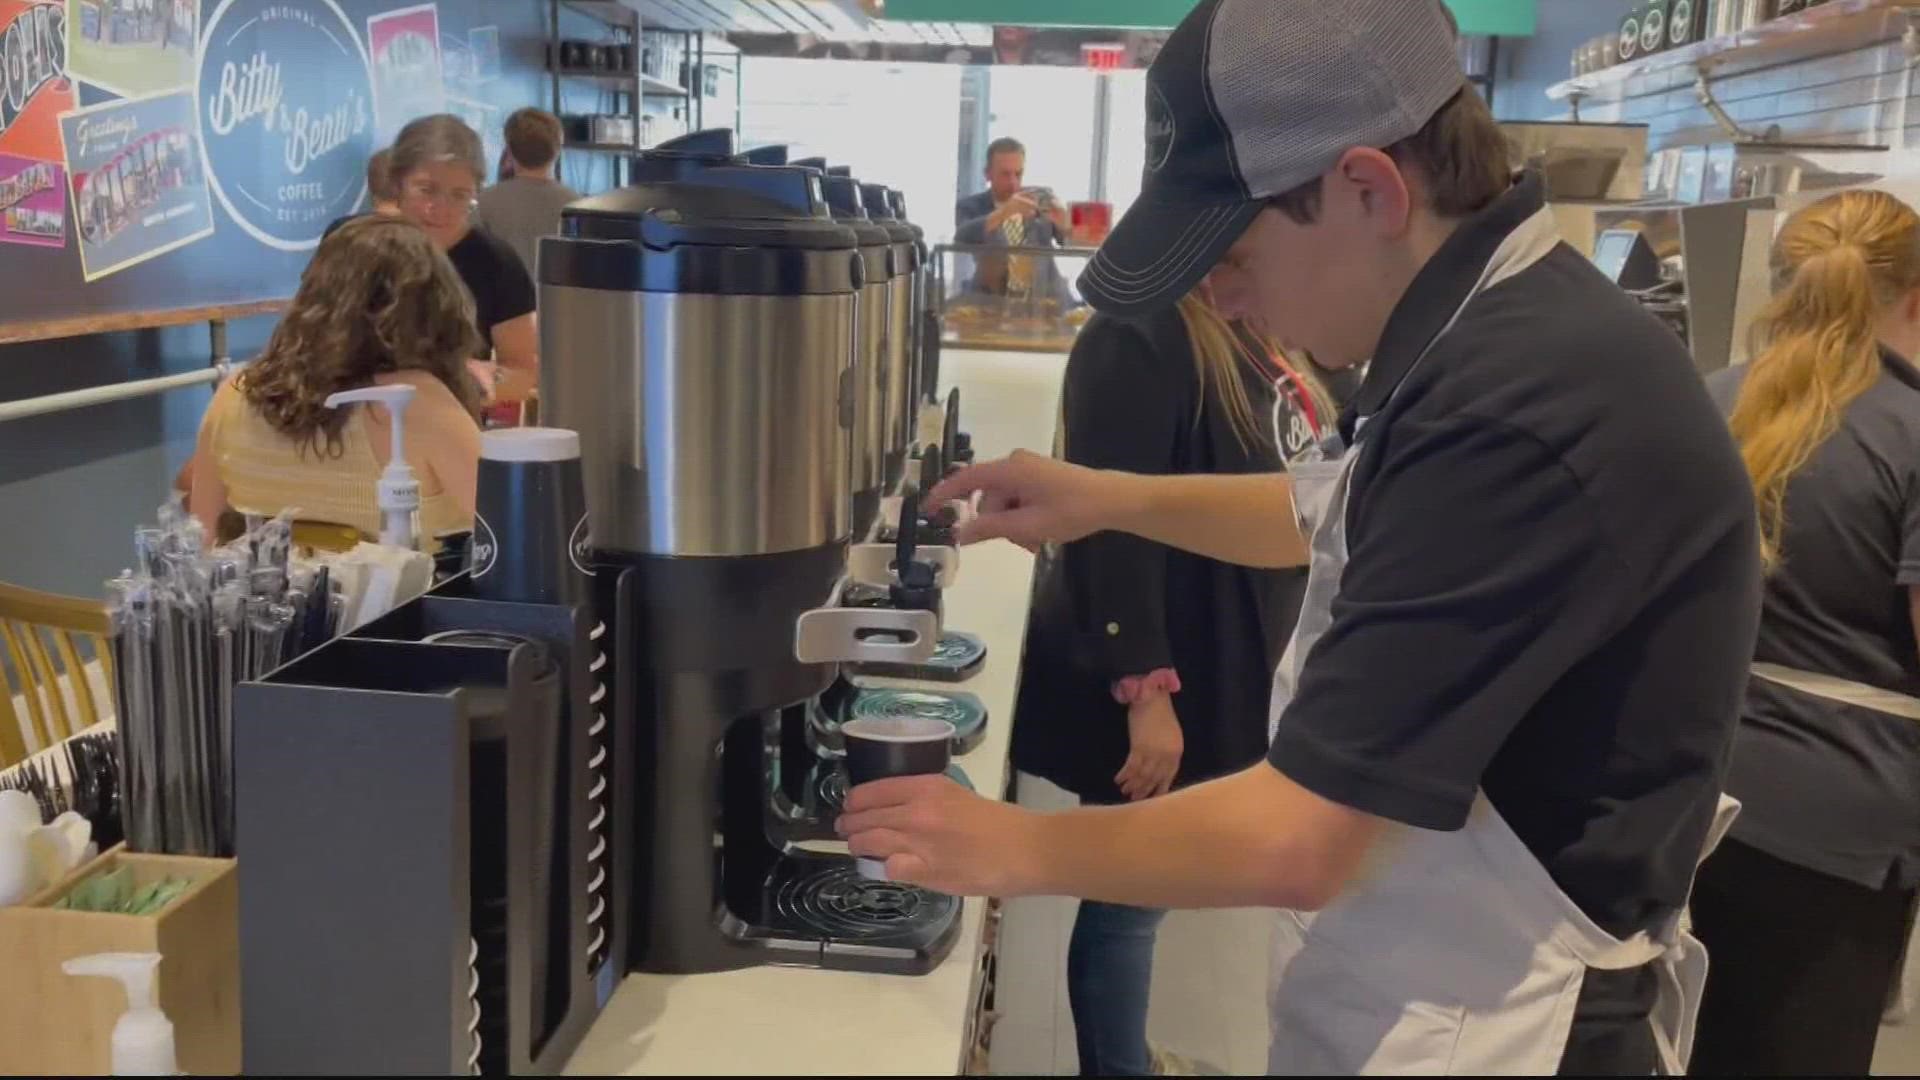 A coffee shop in Georgetown seeks to give people with disabilities employment opportunities.